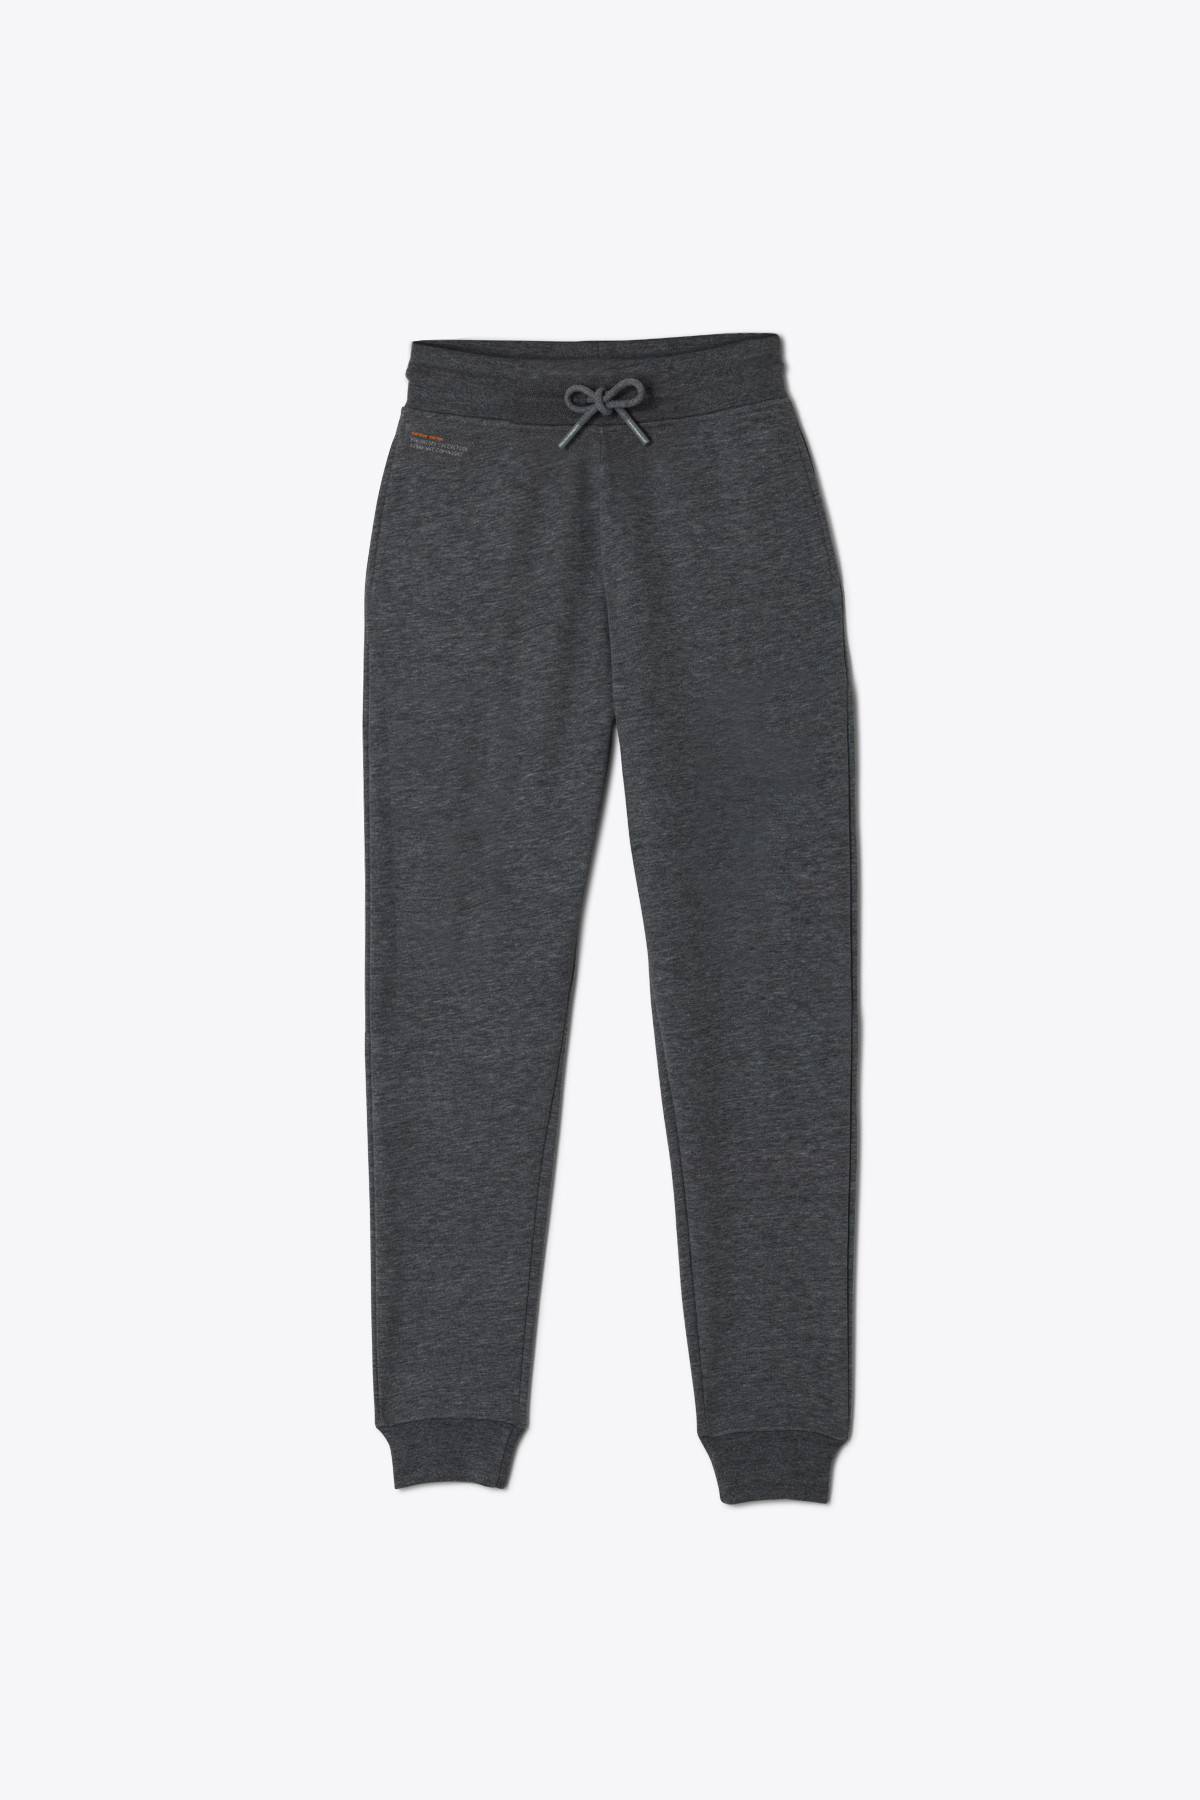 Marvin jogging pants Charcoal Chiney